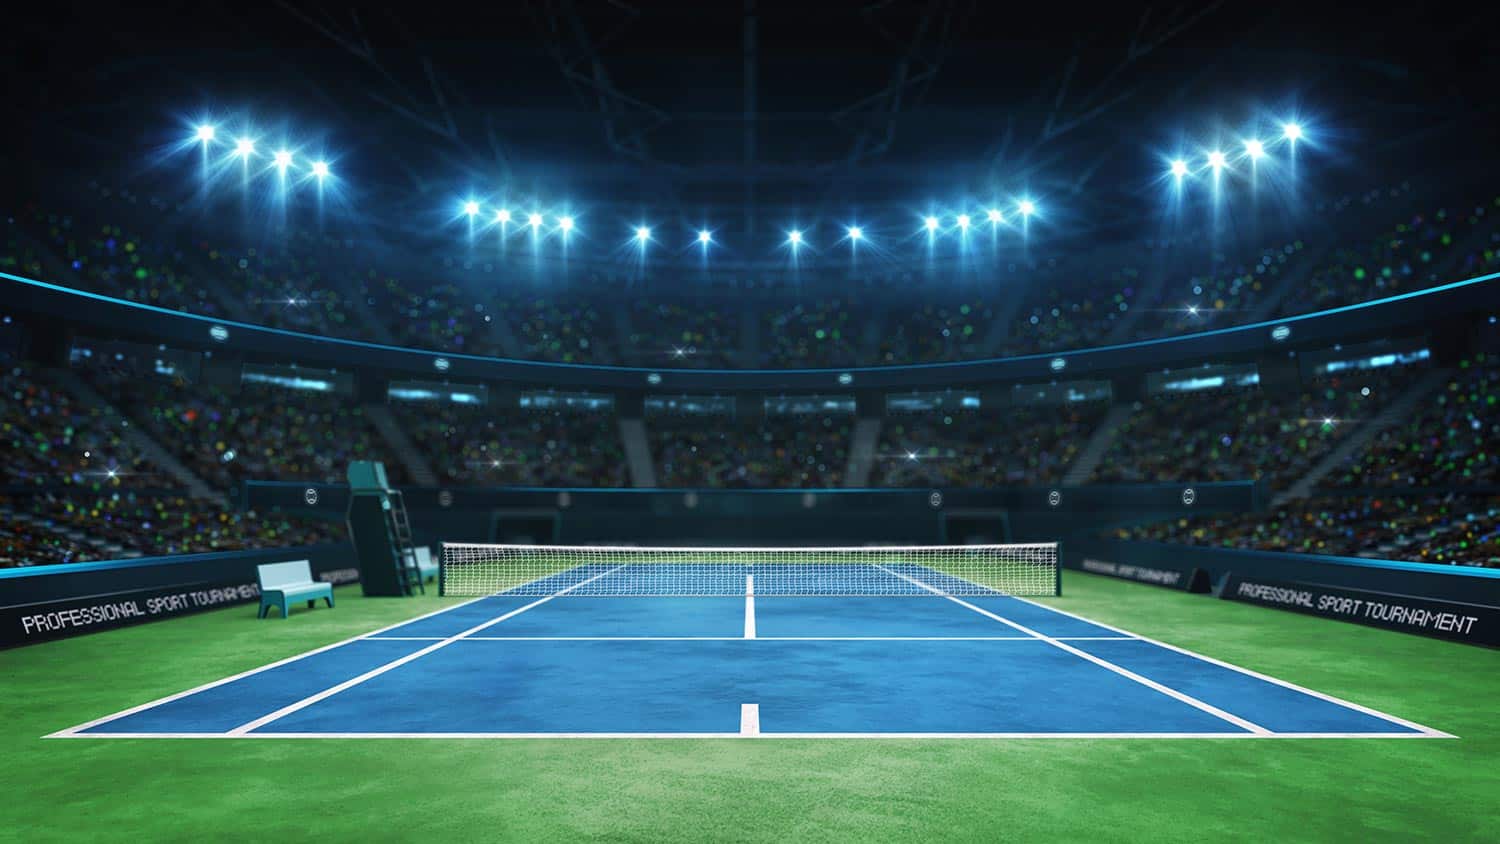 Blue tennis court and illuminated indoor arena with fans